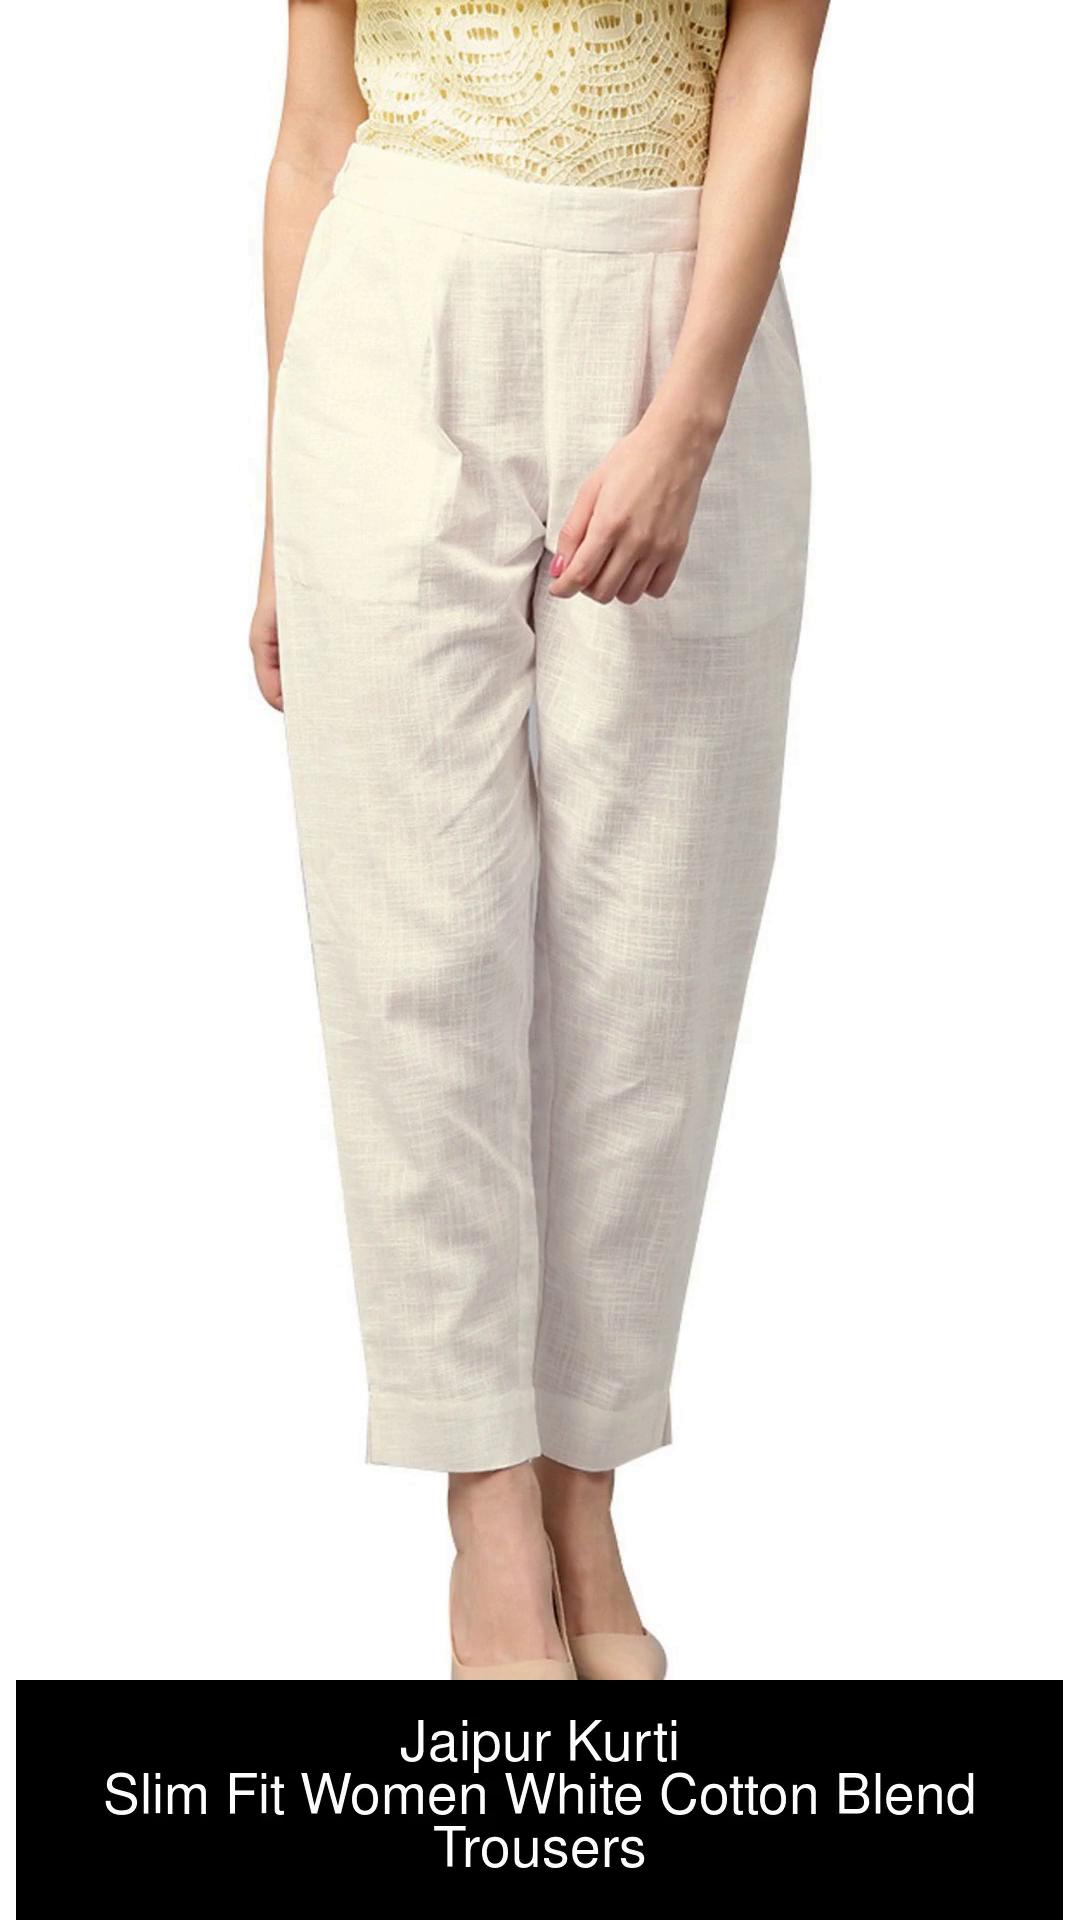 Jaipur Kurti Slim Fit Women White Trousers - Buy Jaipur Kurti Slim Fit Women  White Trousers Online at Best Prices in India